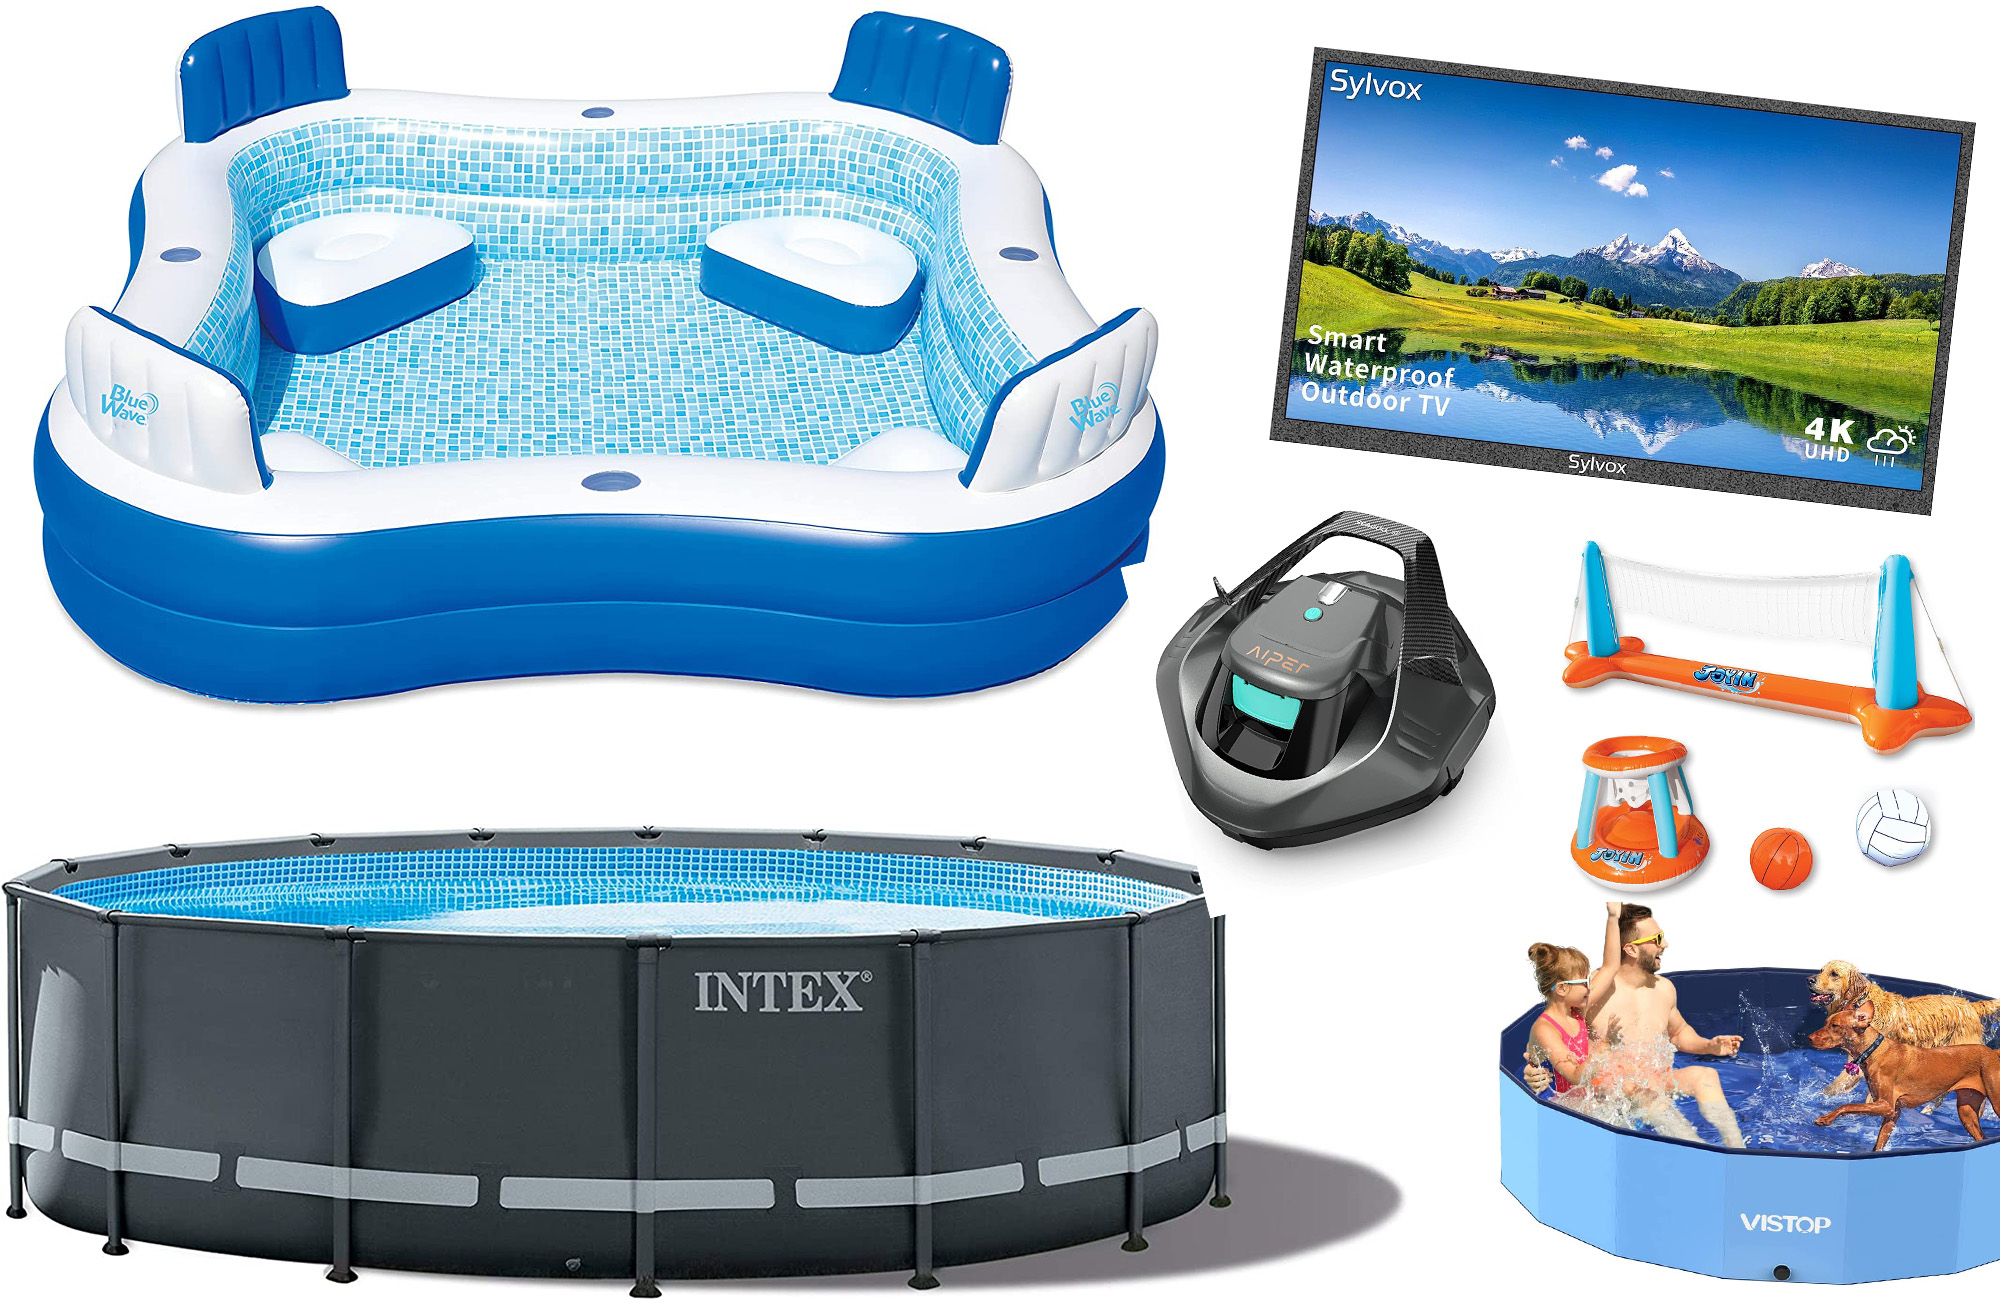 Save big on an above-ground pool and accessories this Prime Day,